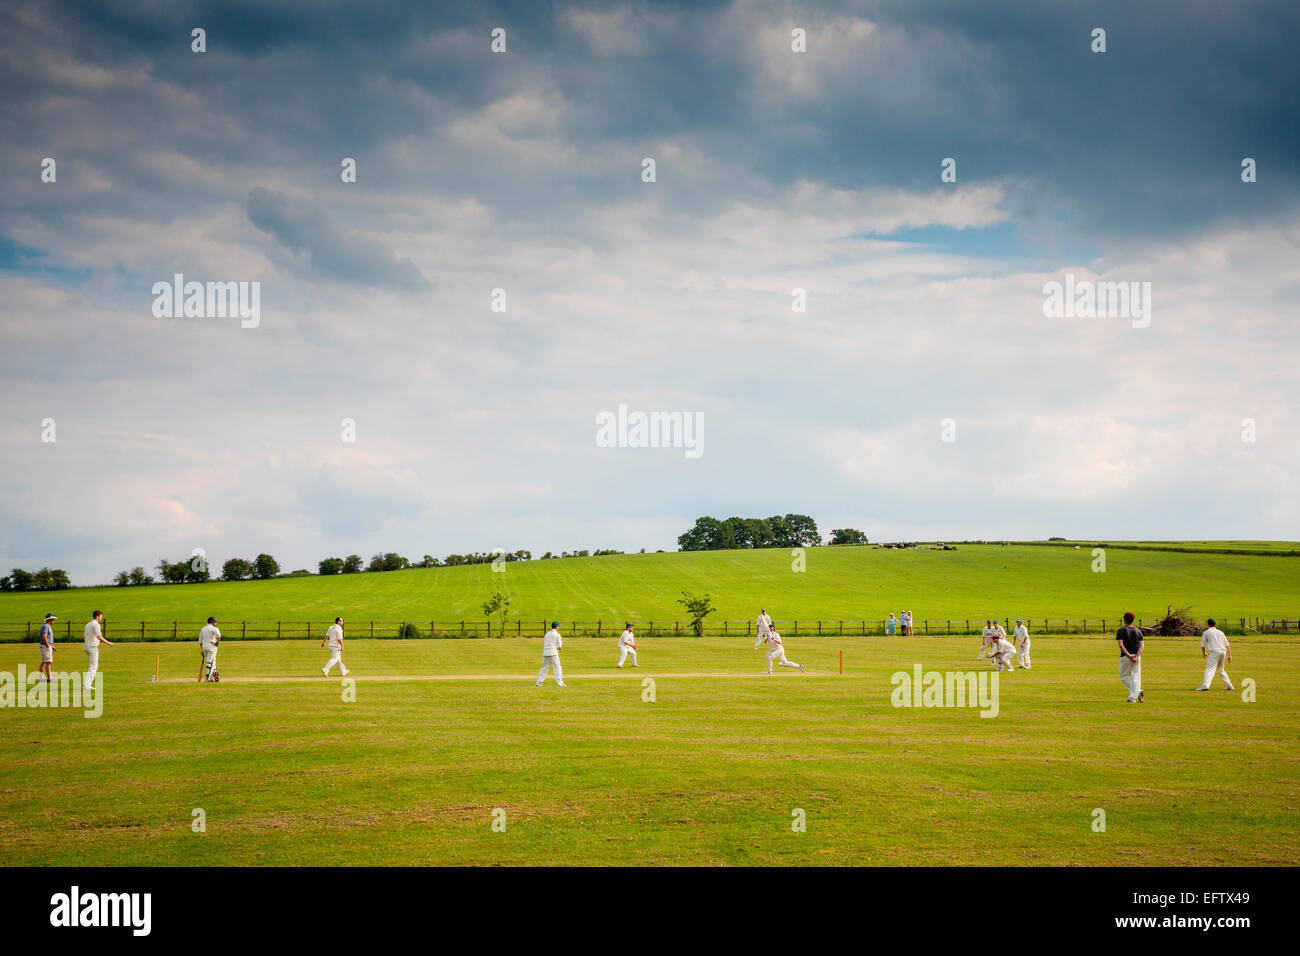 Rural scene with view cricket players playing cricket match on cricket field Stock Photo